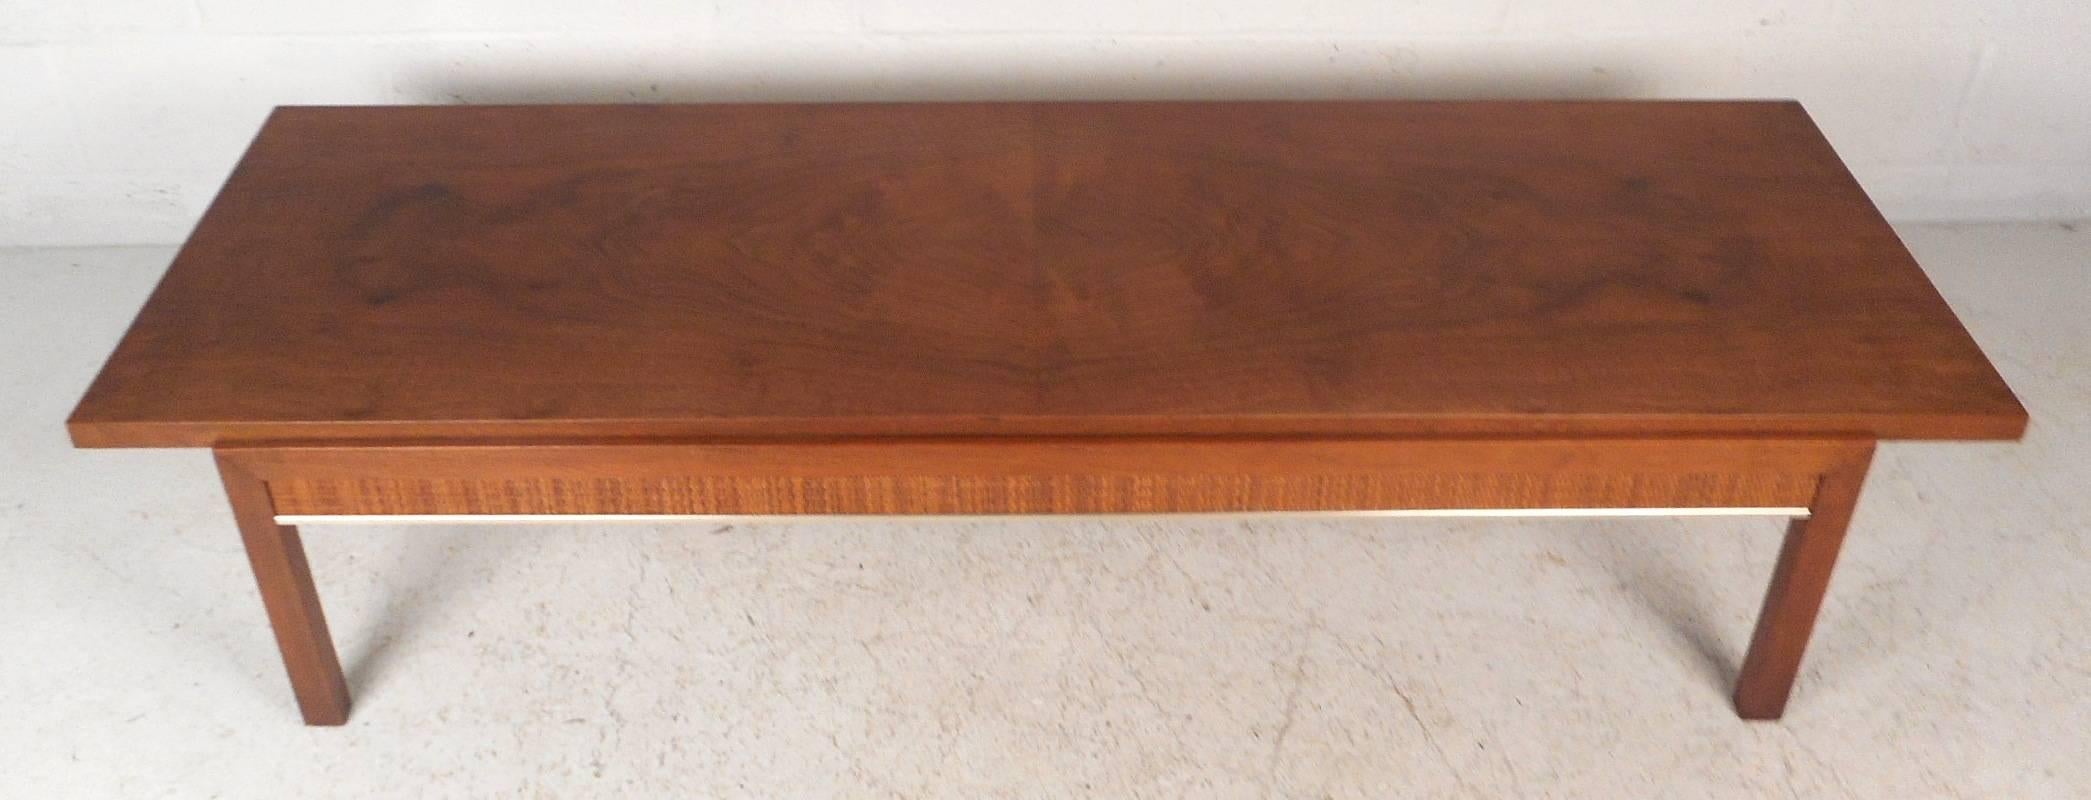 Late 20th Century Mid-Century Modern Walnut Coffee Table with Cane Sides For Sale